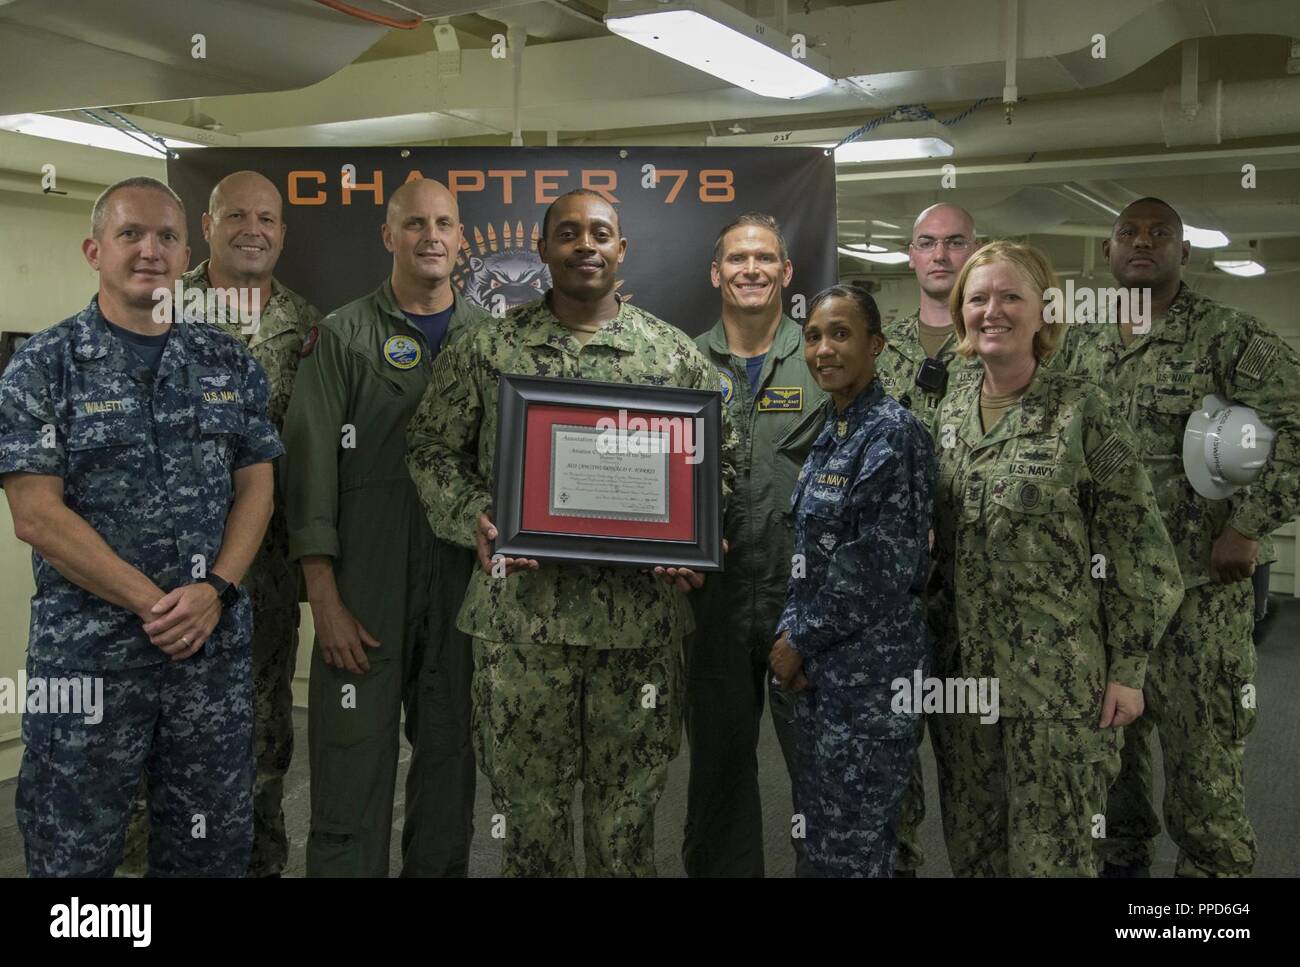 NEWPORT NEWS, Va. (Aug. 23, 2018) Aviation Ordnanceman 1st Class Donald Harris, from Tallahassee, Fla., assigned to USS Gerald R. Ford's (CVN 78) weapons department, center, poses for a group photo after being awarded Aviation Ordnanceman of the Year by Capt. John J. Cummings, Ford's commanding officer. Harris will be promoted to chief petty officer next month. Stock Photo